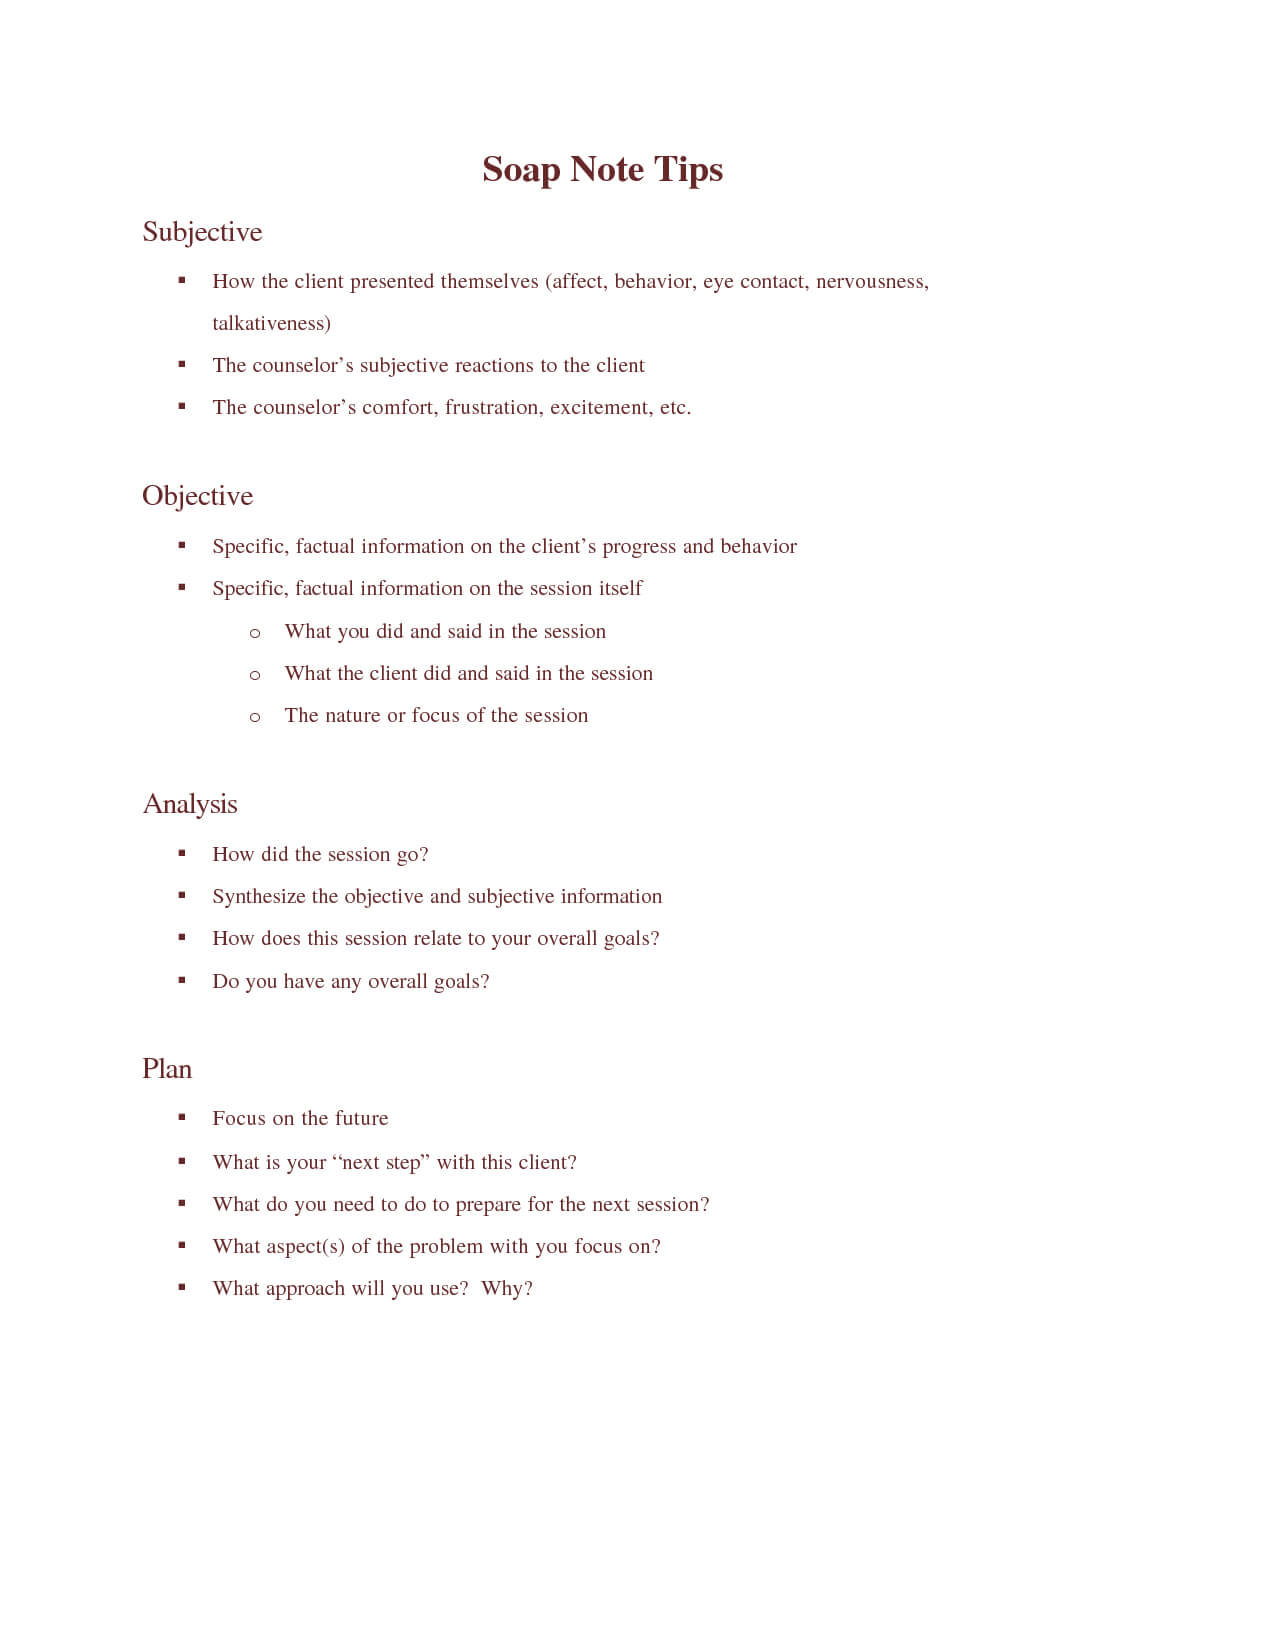 Note Templates In This Soap Note And Progress Note Kit For Soap Note Template Word